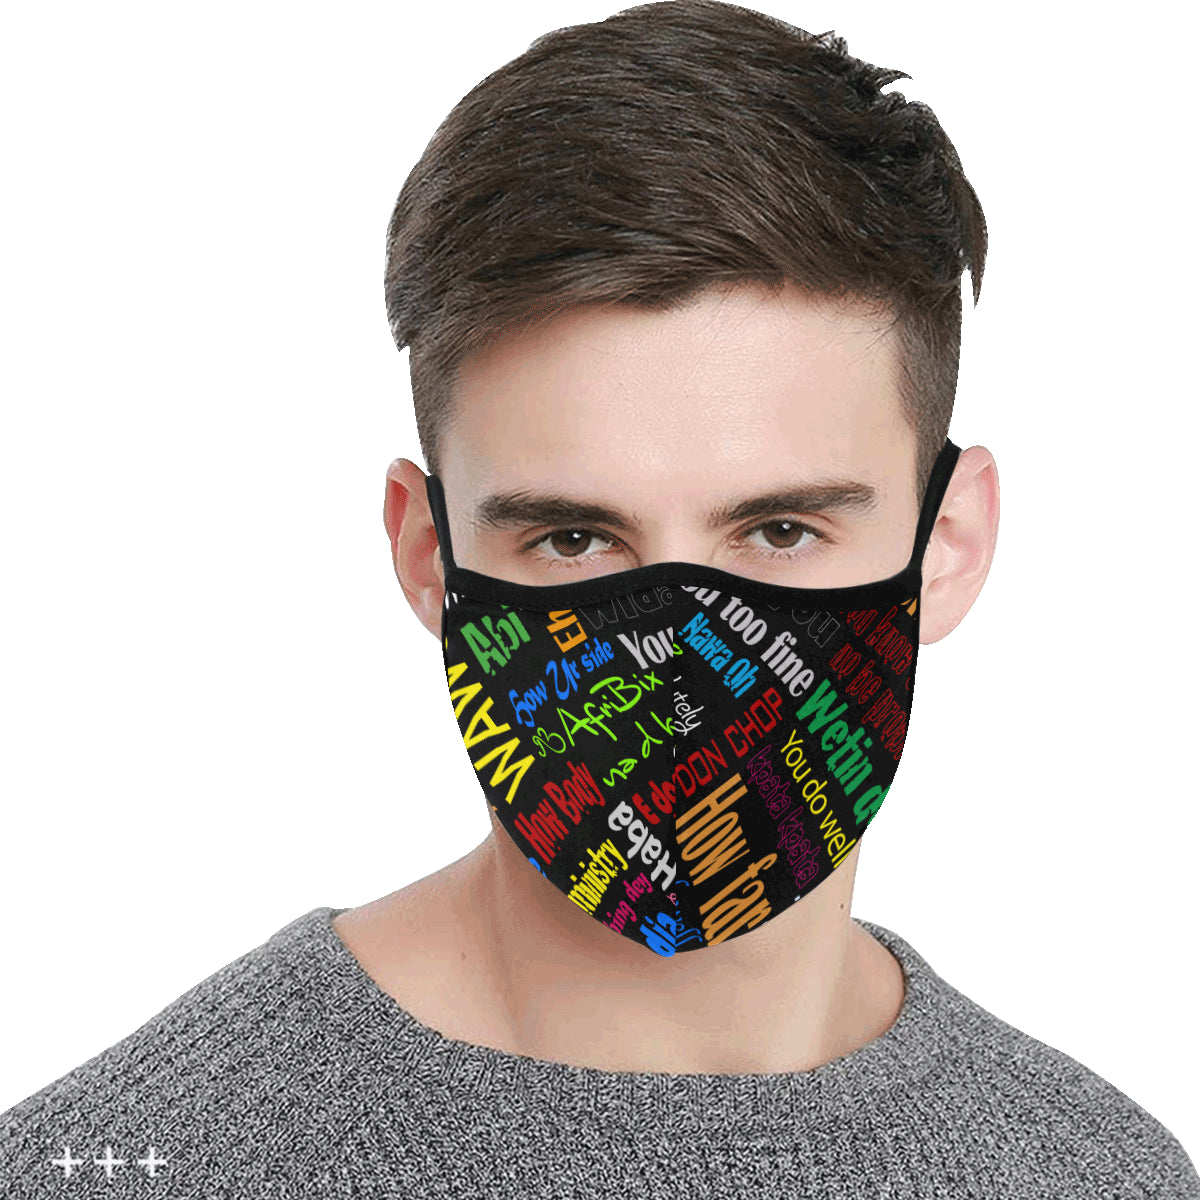 flyersetcinc Pidgin Print Noir Cotton Fabric Face Mask (30 Filters Included) - Non-medical use